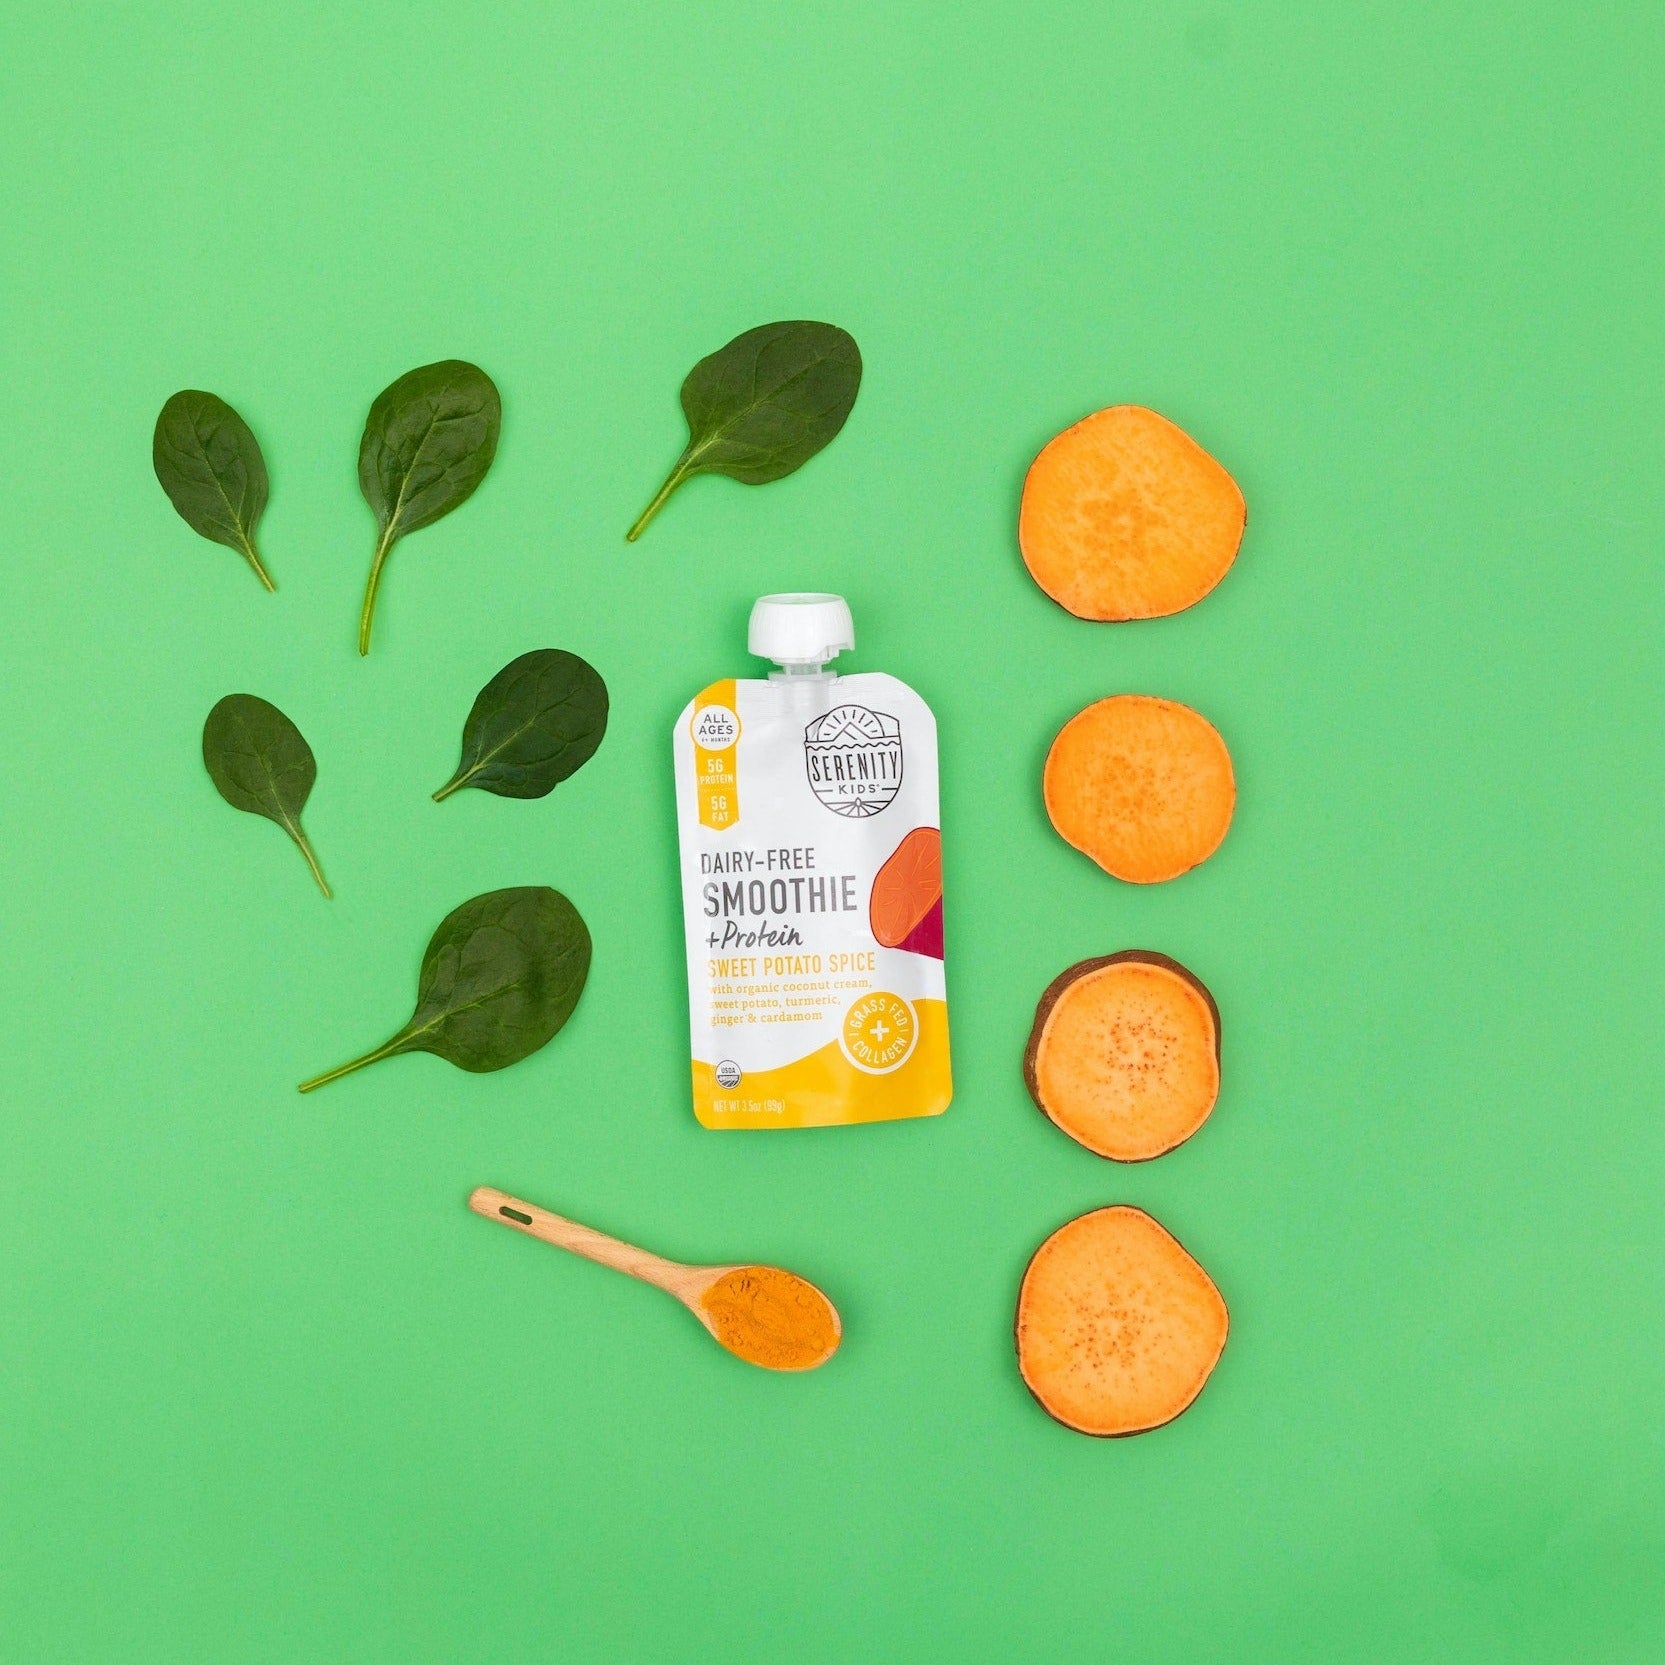 Sweet Potato Spice Dairy-Free Smoothie + Protein. - Serenity Kids - Combo Ingredients